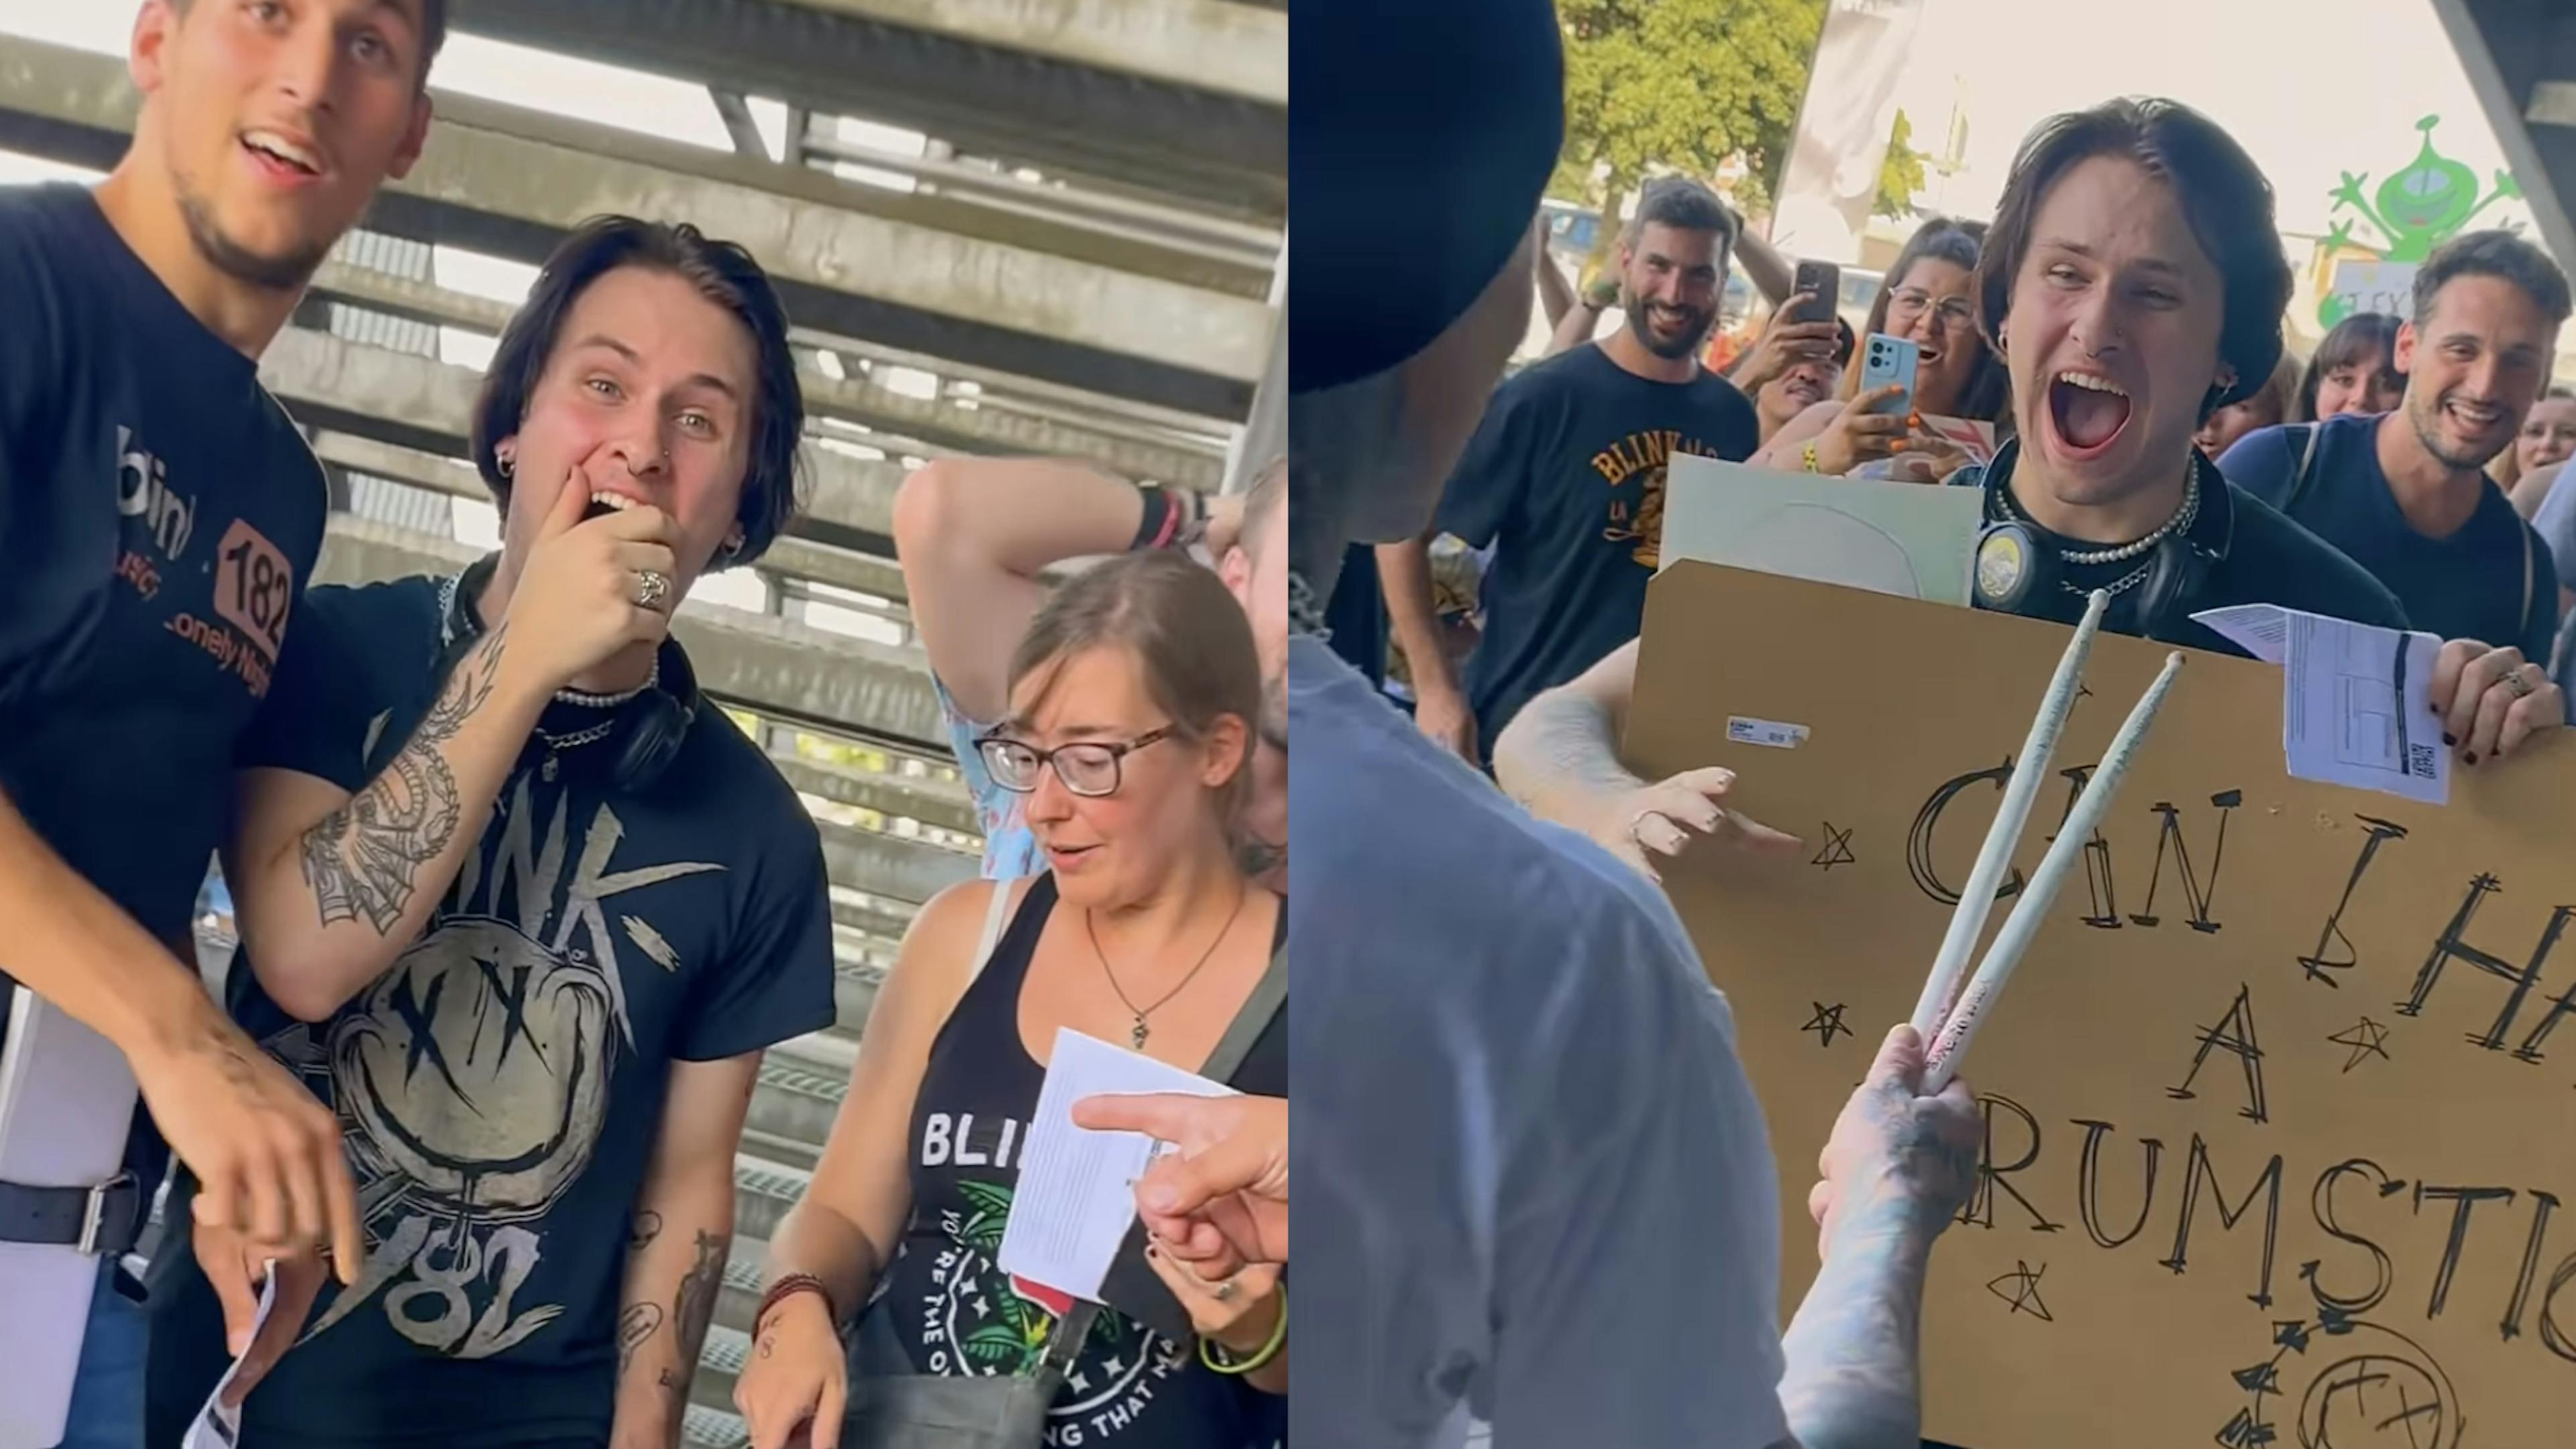 See Travis Barker personally gift a fan drumsticks on the first day of blink-182’s tour